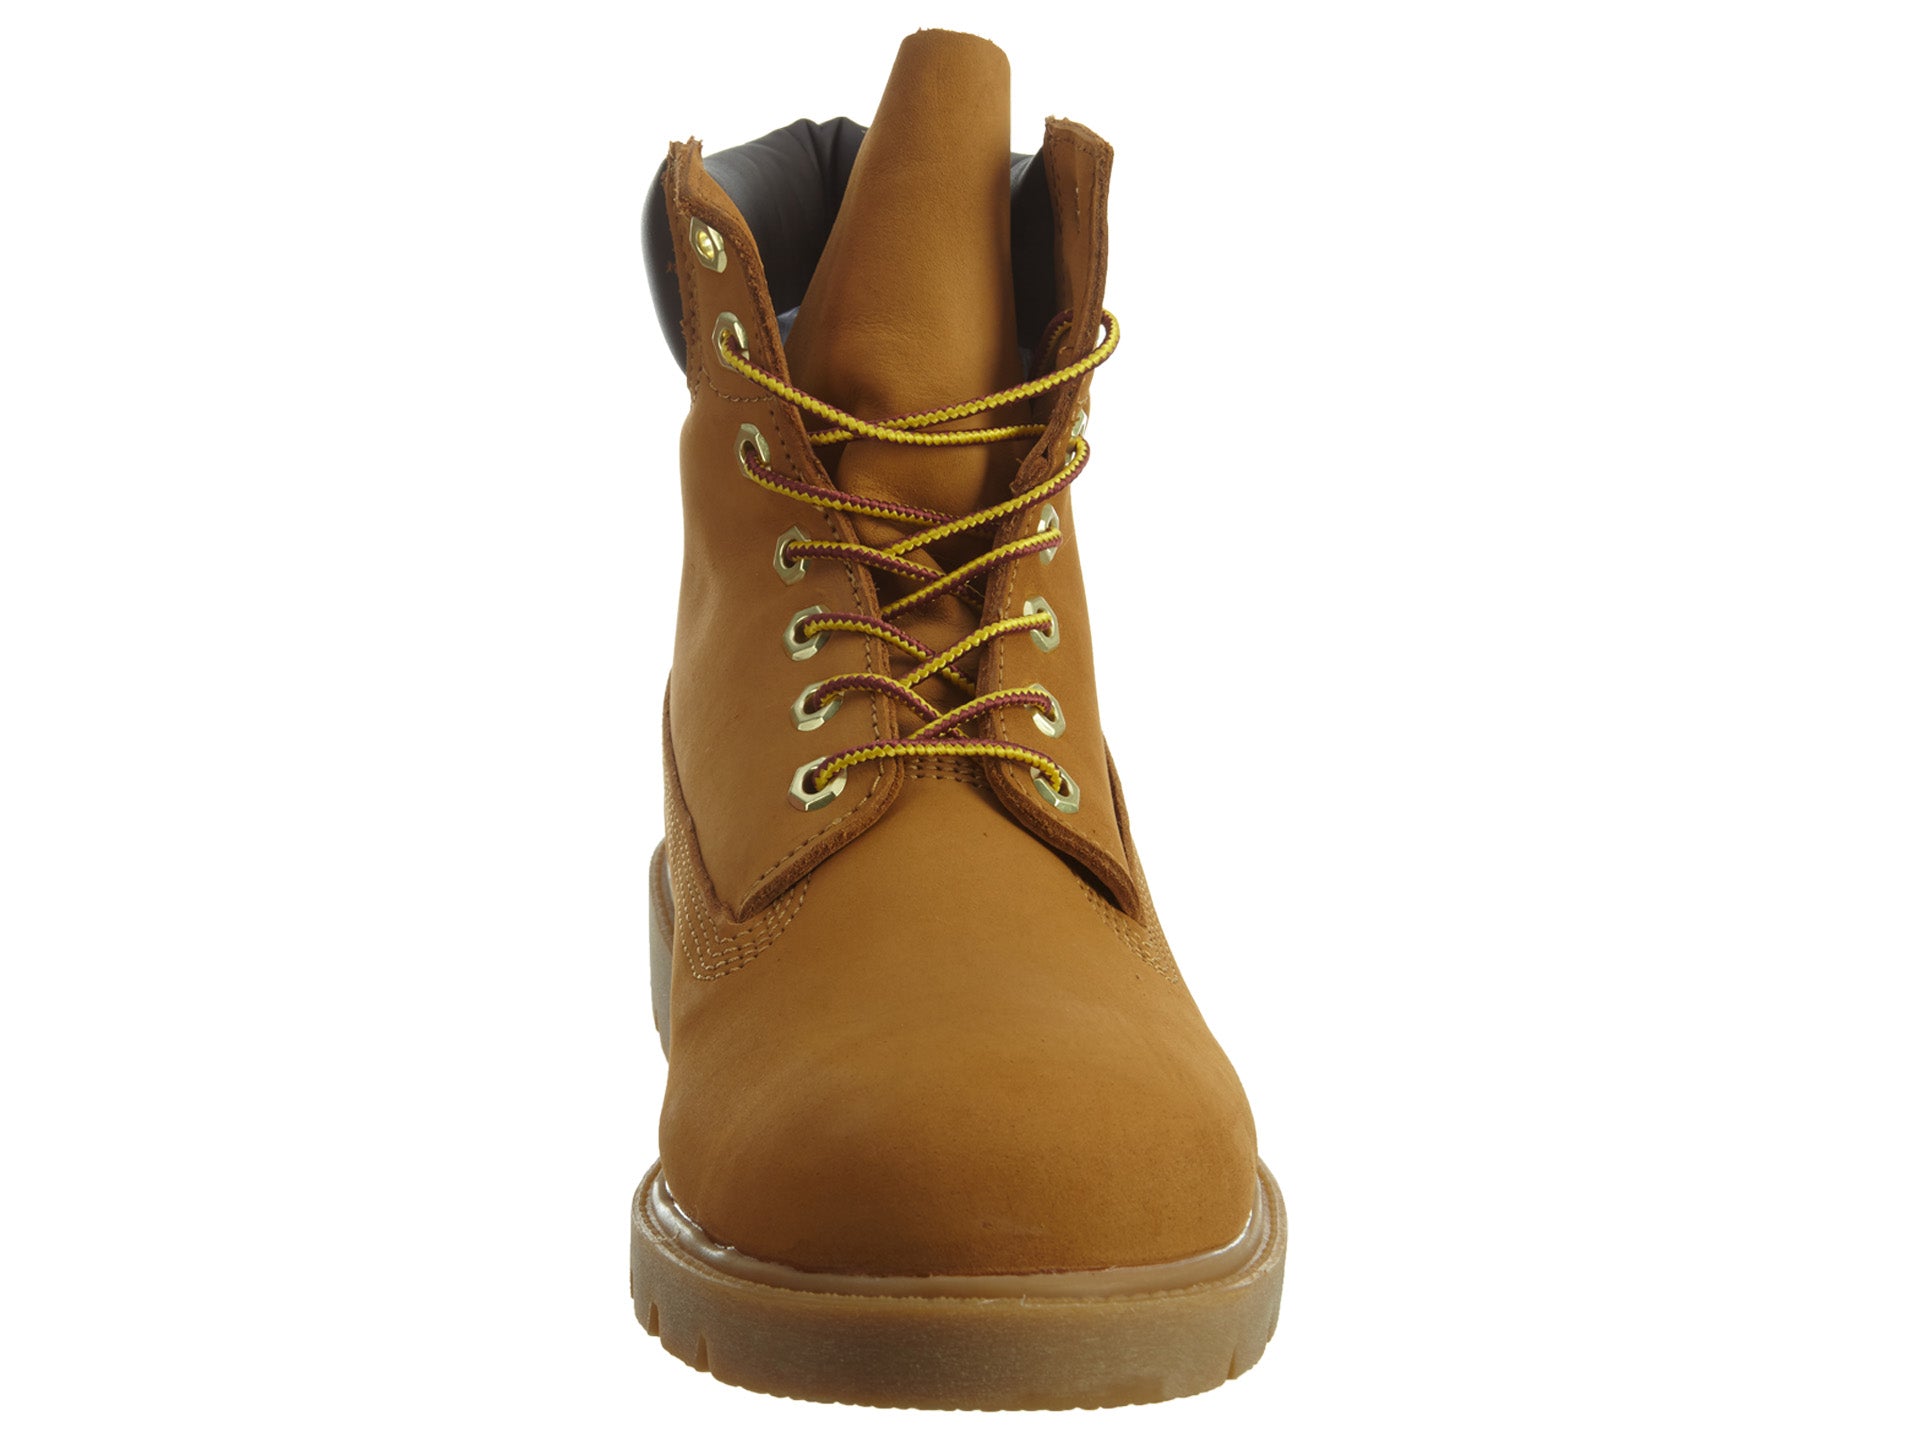 TIMBERLAND 6 IN BASIC BOOT MENS STYLE # 18094